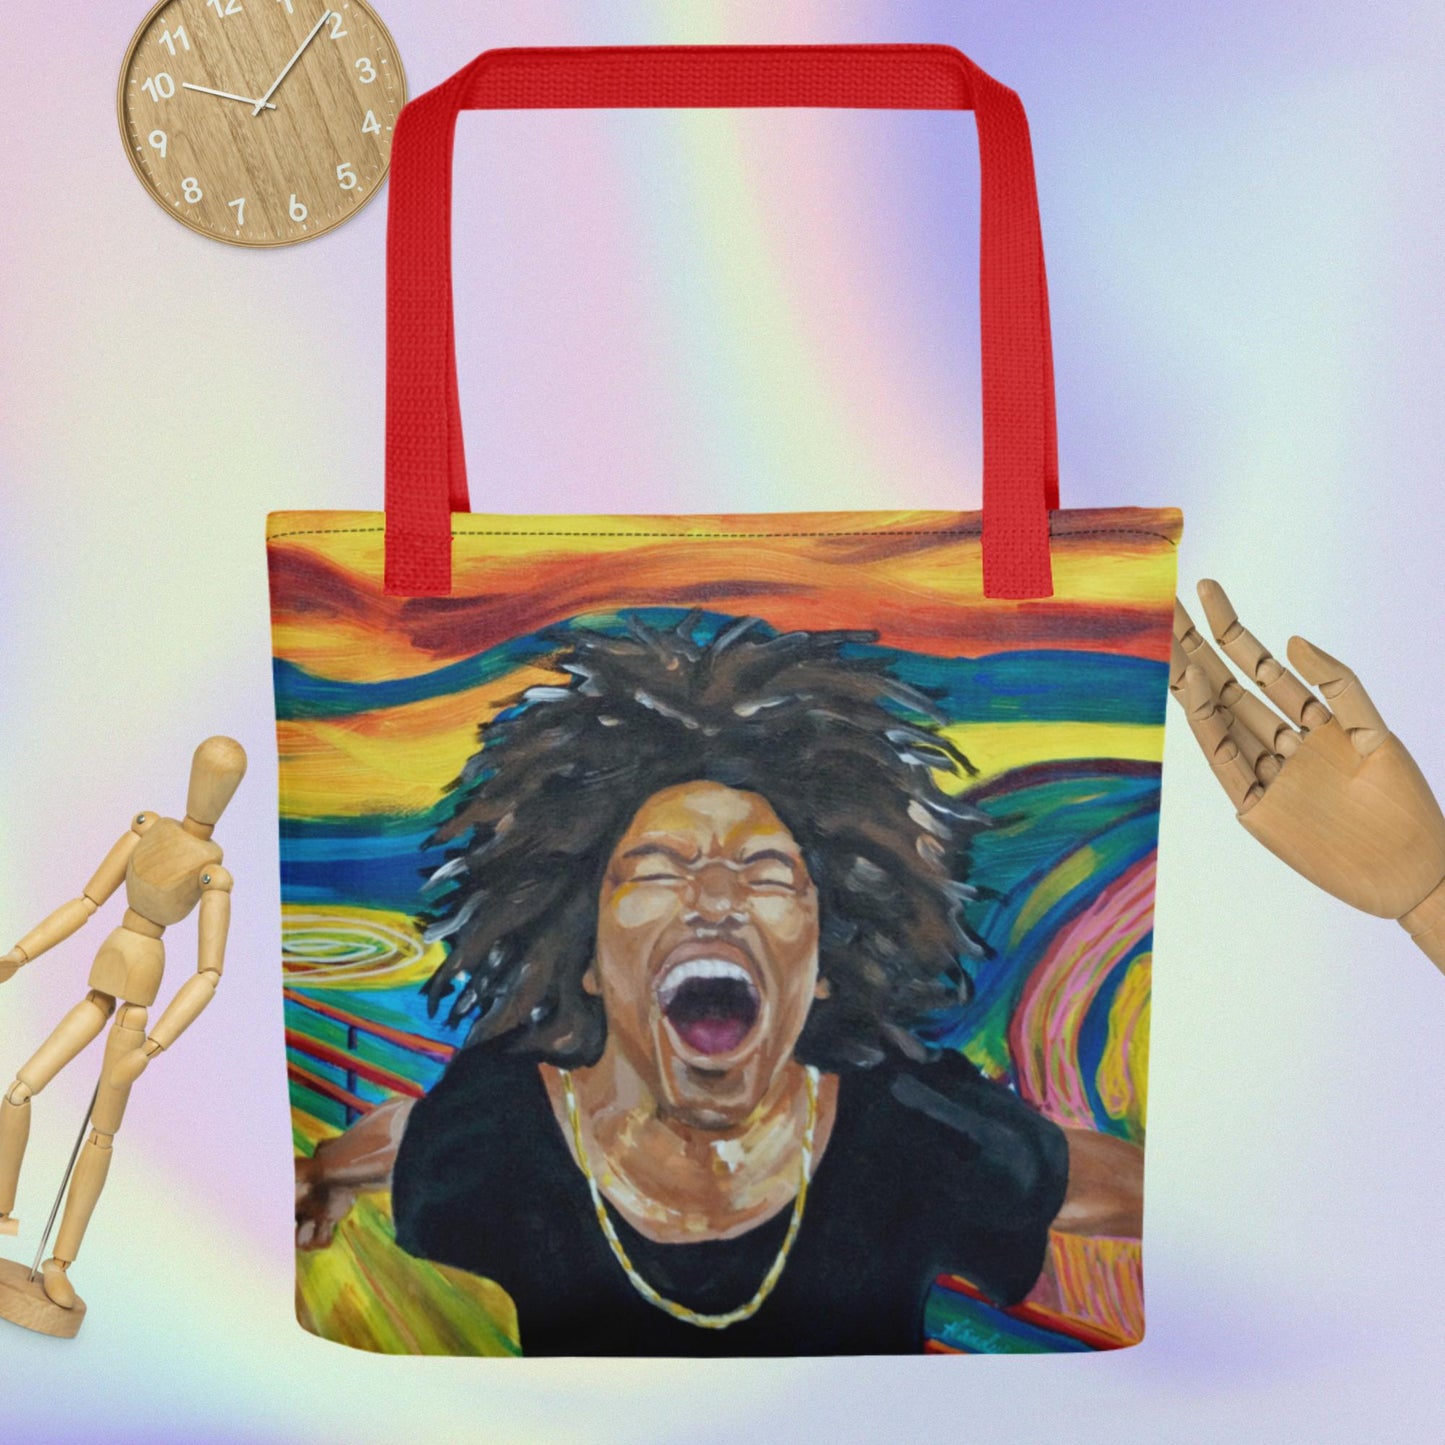 tote bag with artwork from original painting by Cheryl Handy. "Holla!" w/ red handle.